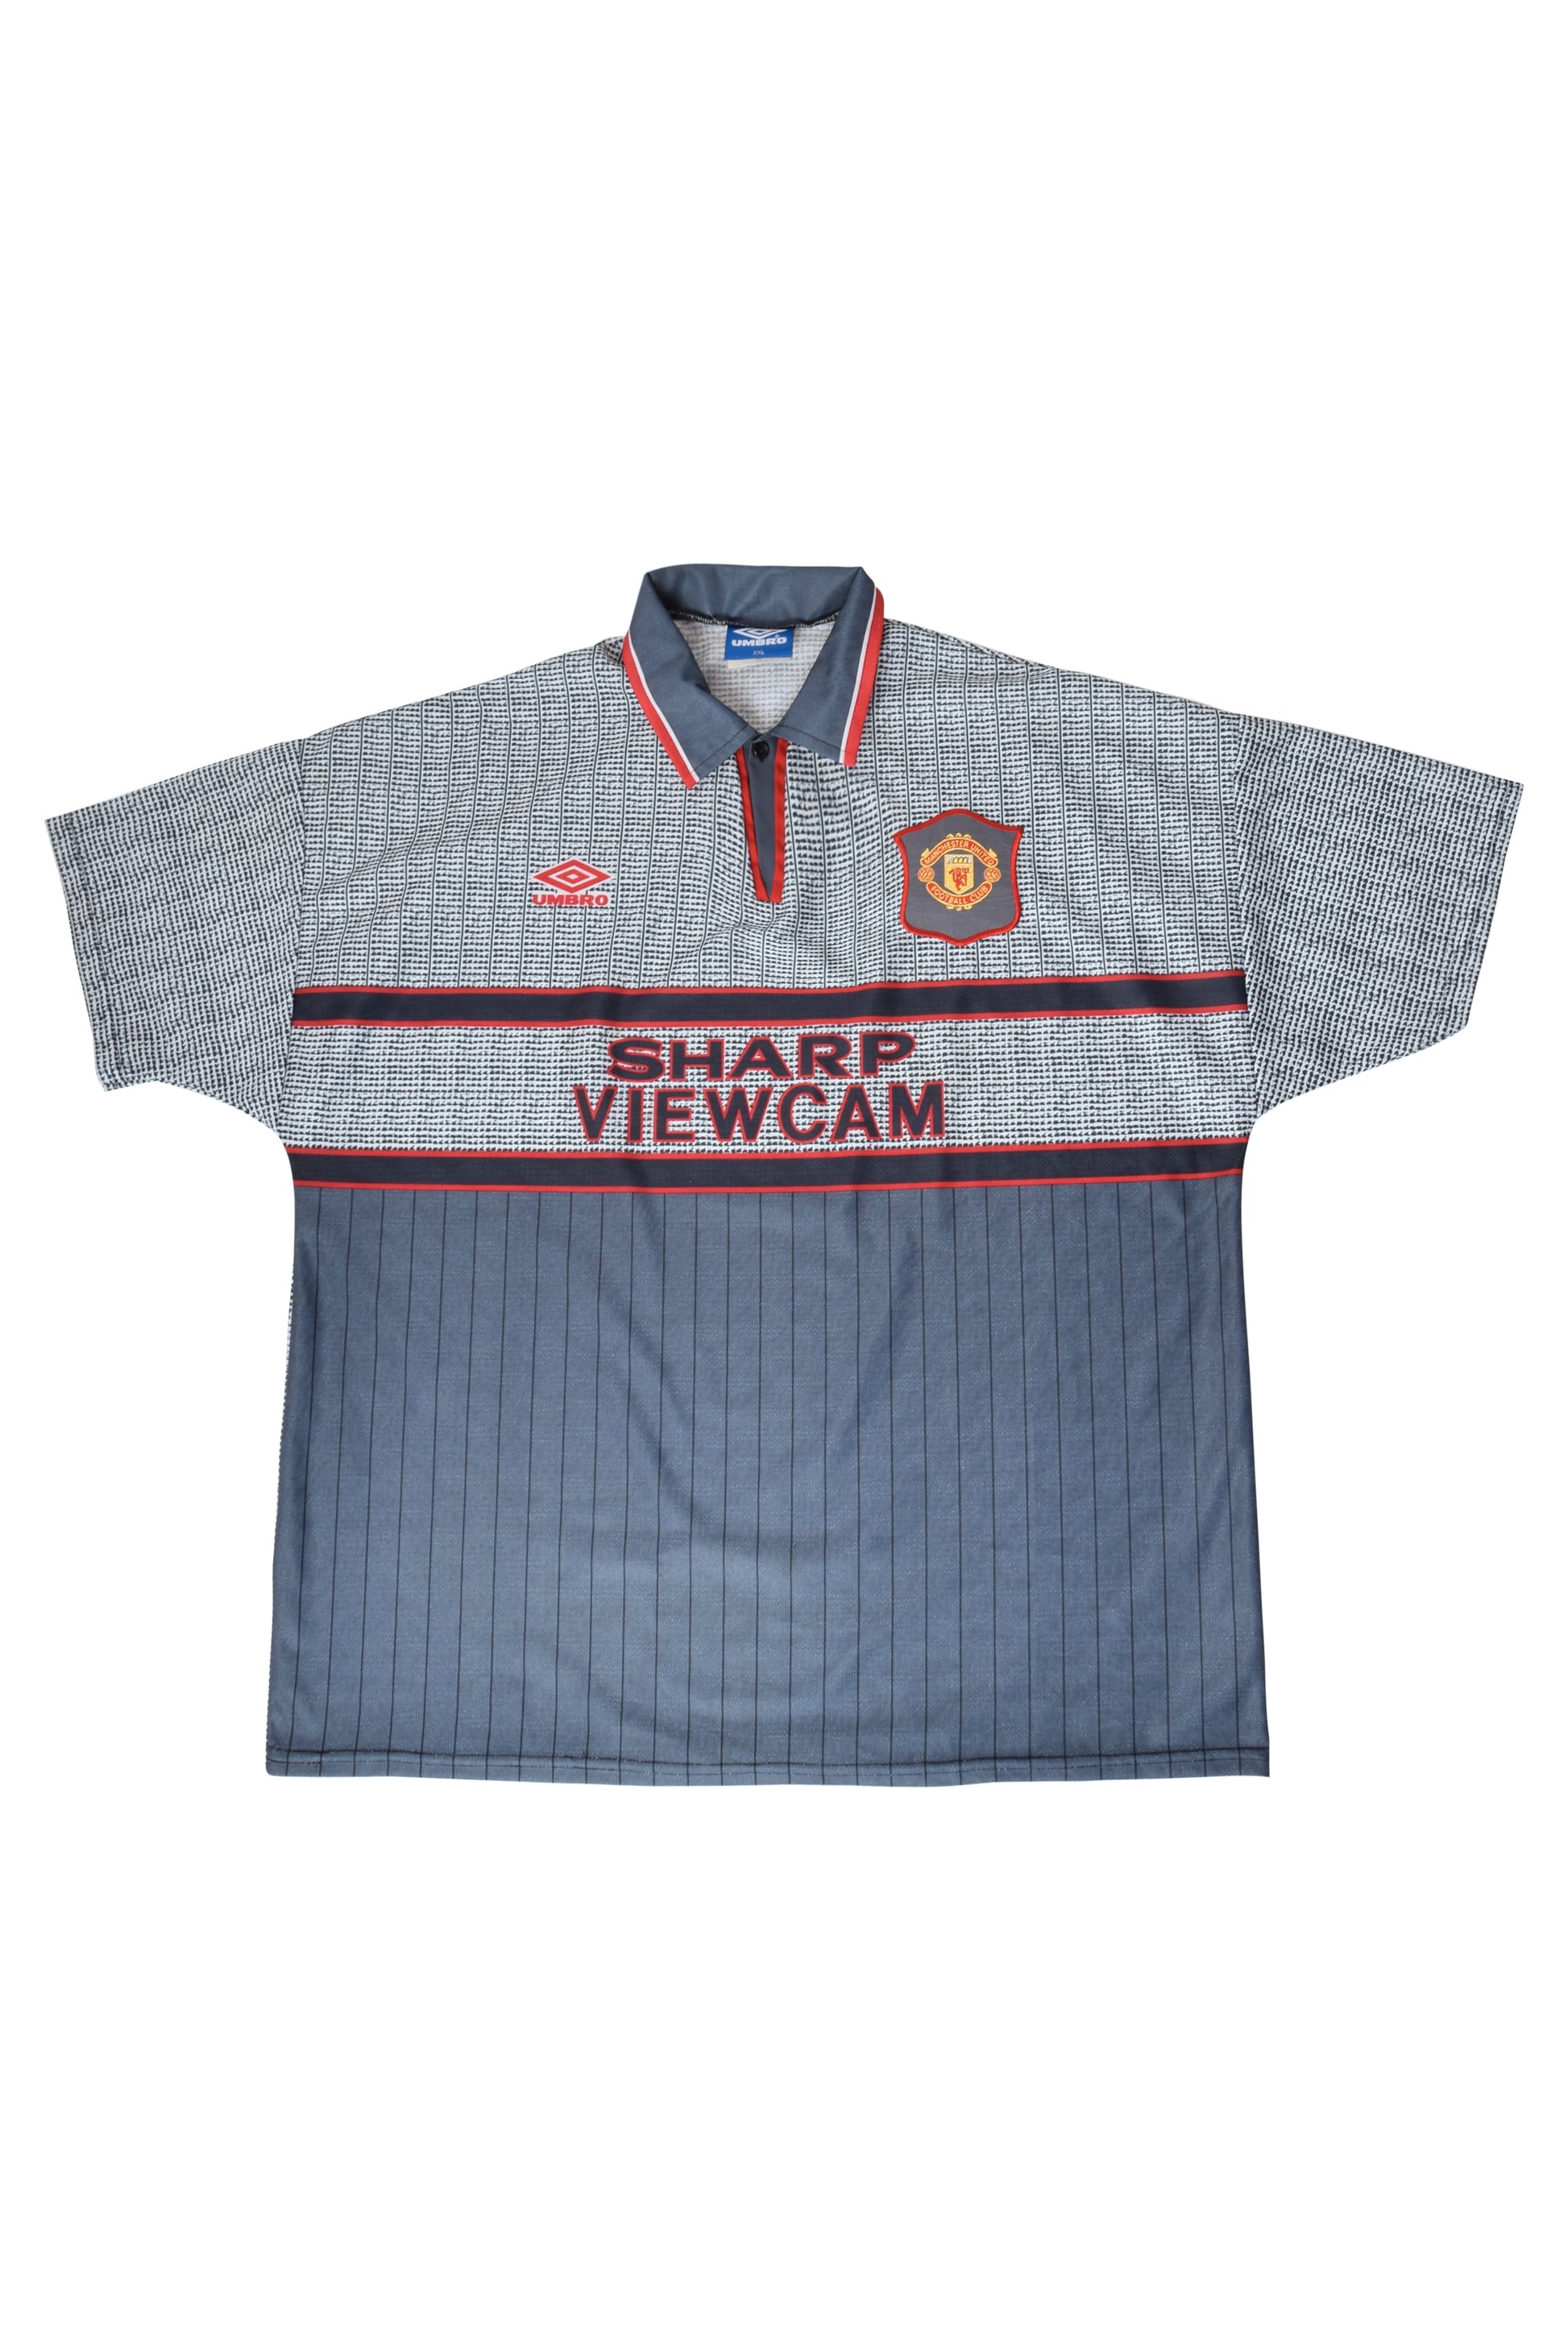 Vintage Manchester United Umbro 1995-1996 Away Football Shirt Grey Size XXL Sharp Viewcam Made in England